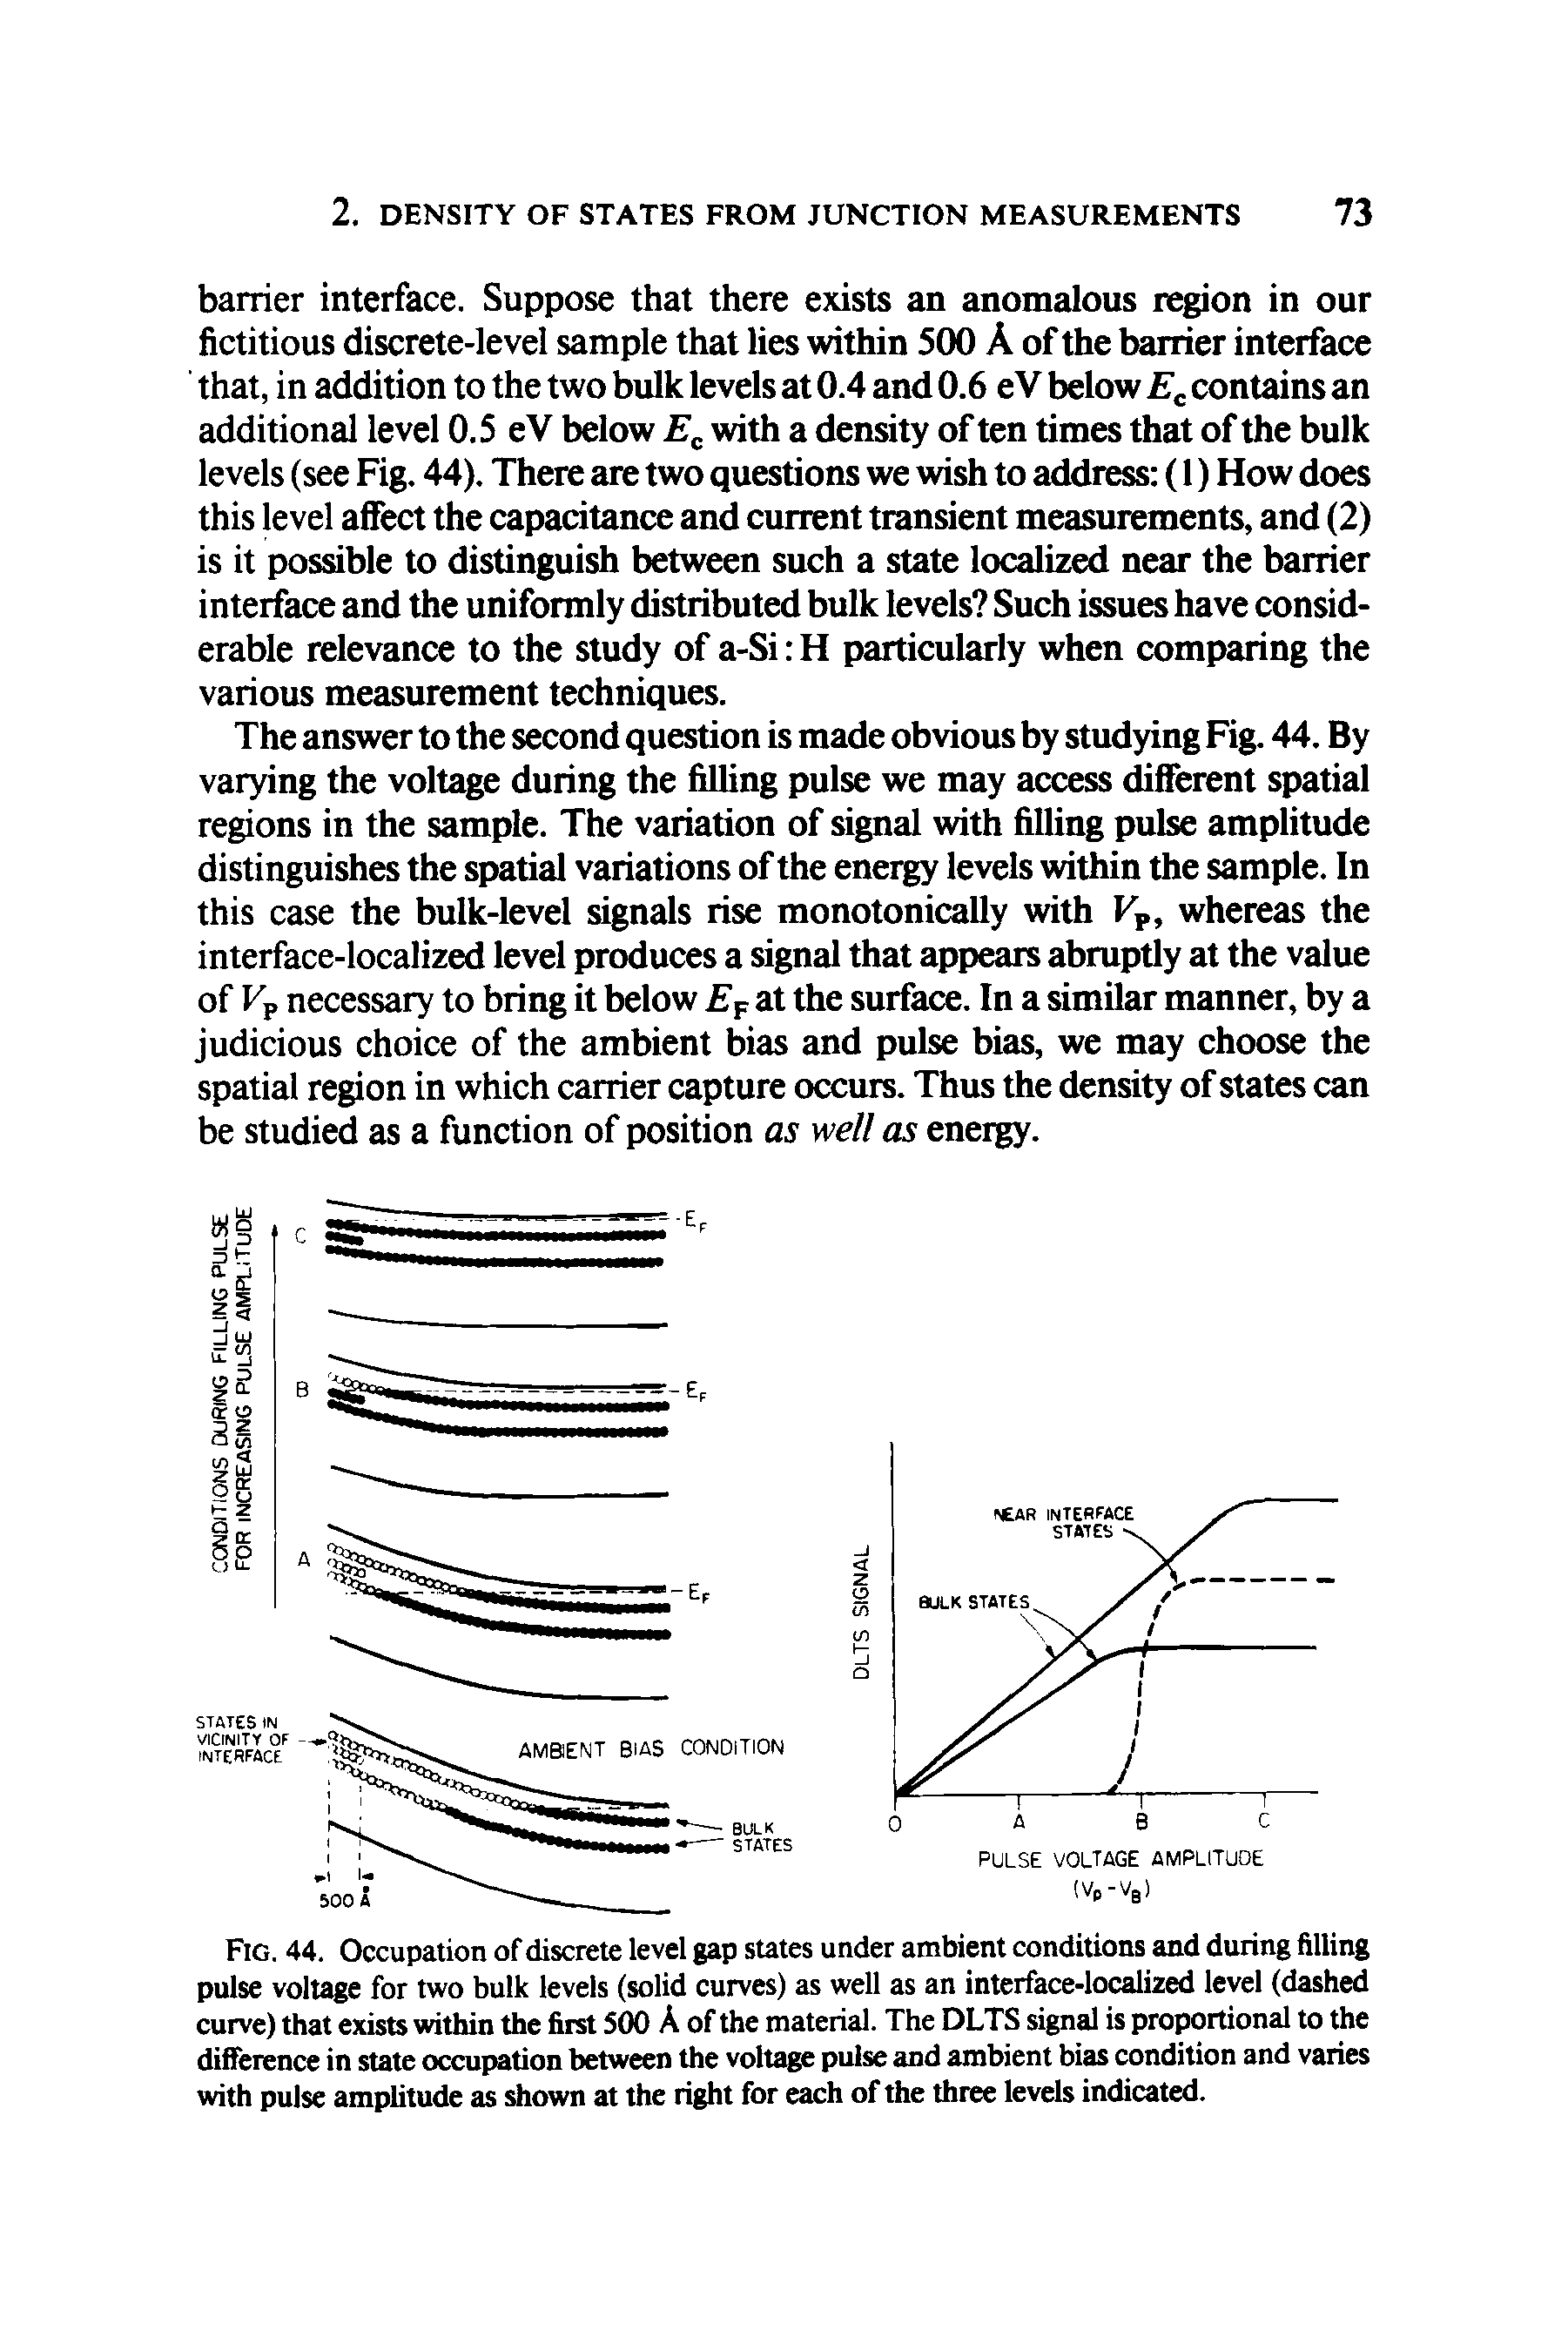 Fig. 44. Occupation of discrete level gap states under ambient conditions and during filling pulse voltage for two bulk levels (solid curves) as well as an interface-localized level (dashed curve) that exists within the first 500 A of the material. The DLTS signal is proportional to the difference in state occupation between the voltage pulse and ambient bias condition and varies with pulse amplitude as shown at the right for each of the three levels indicated.